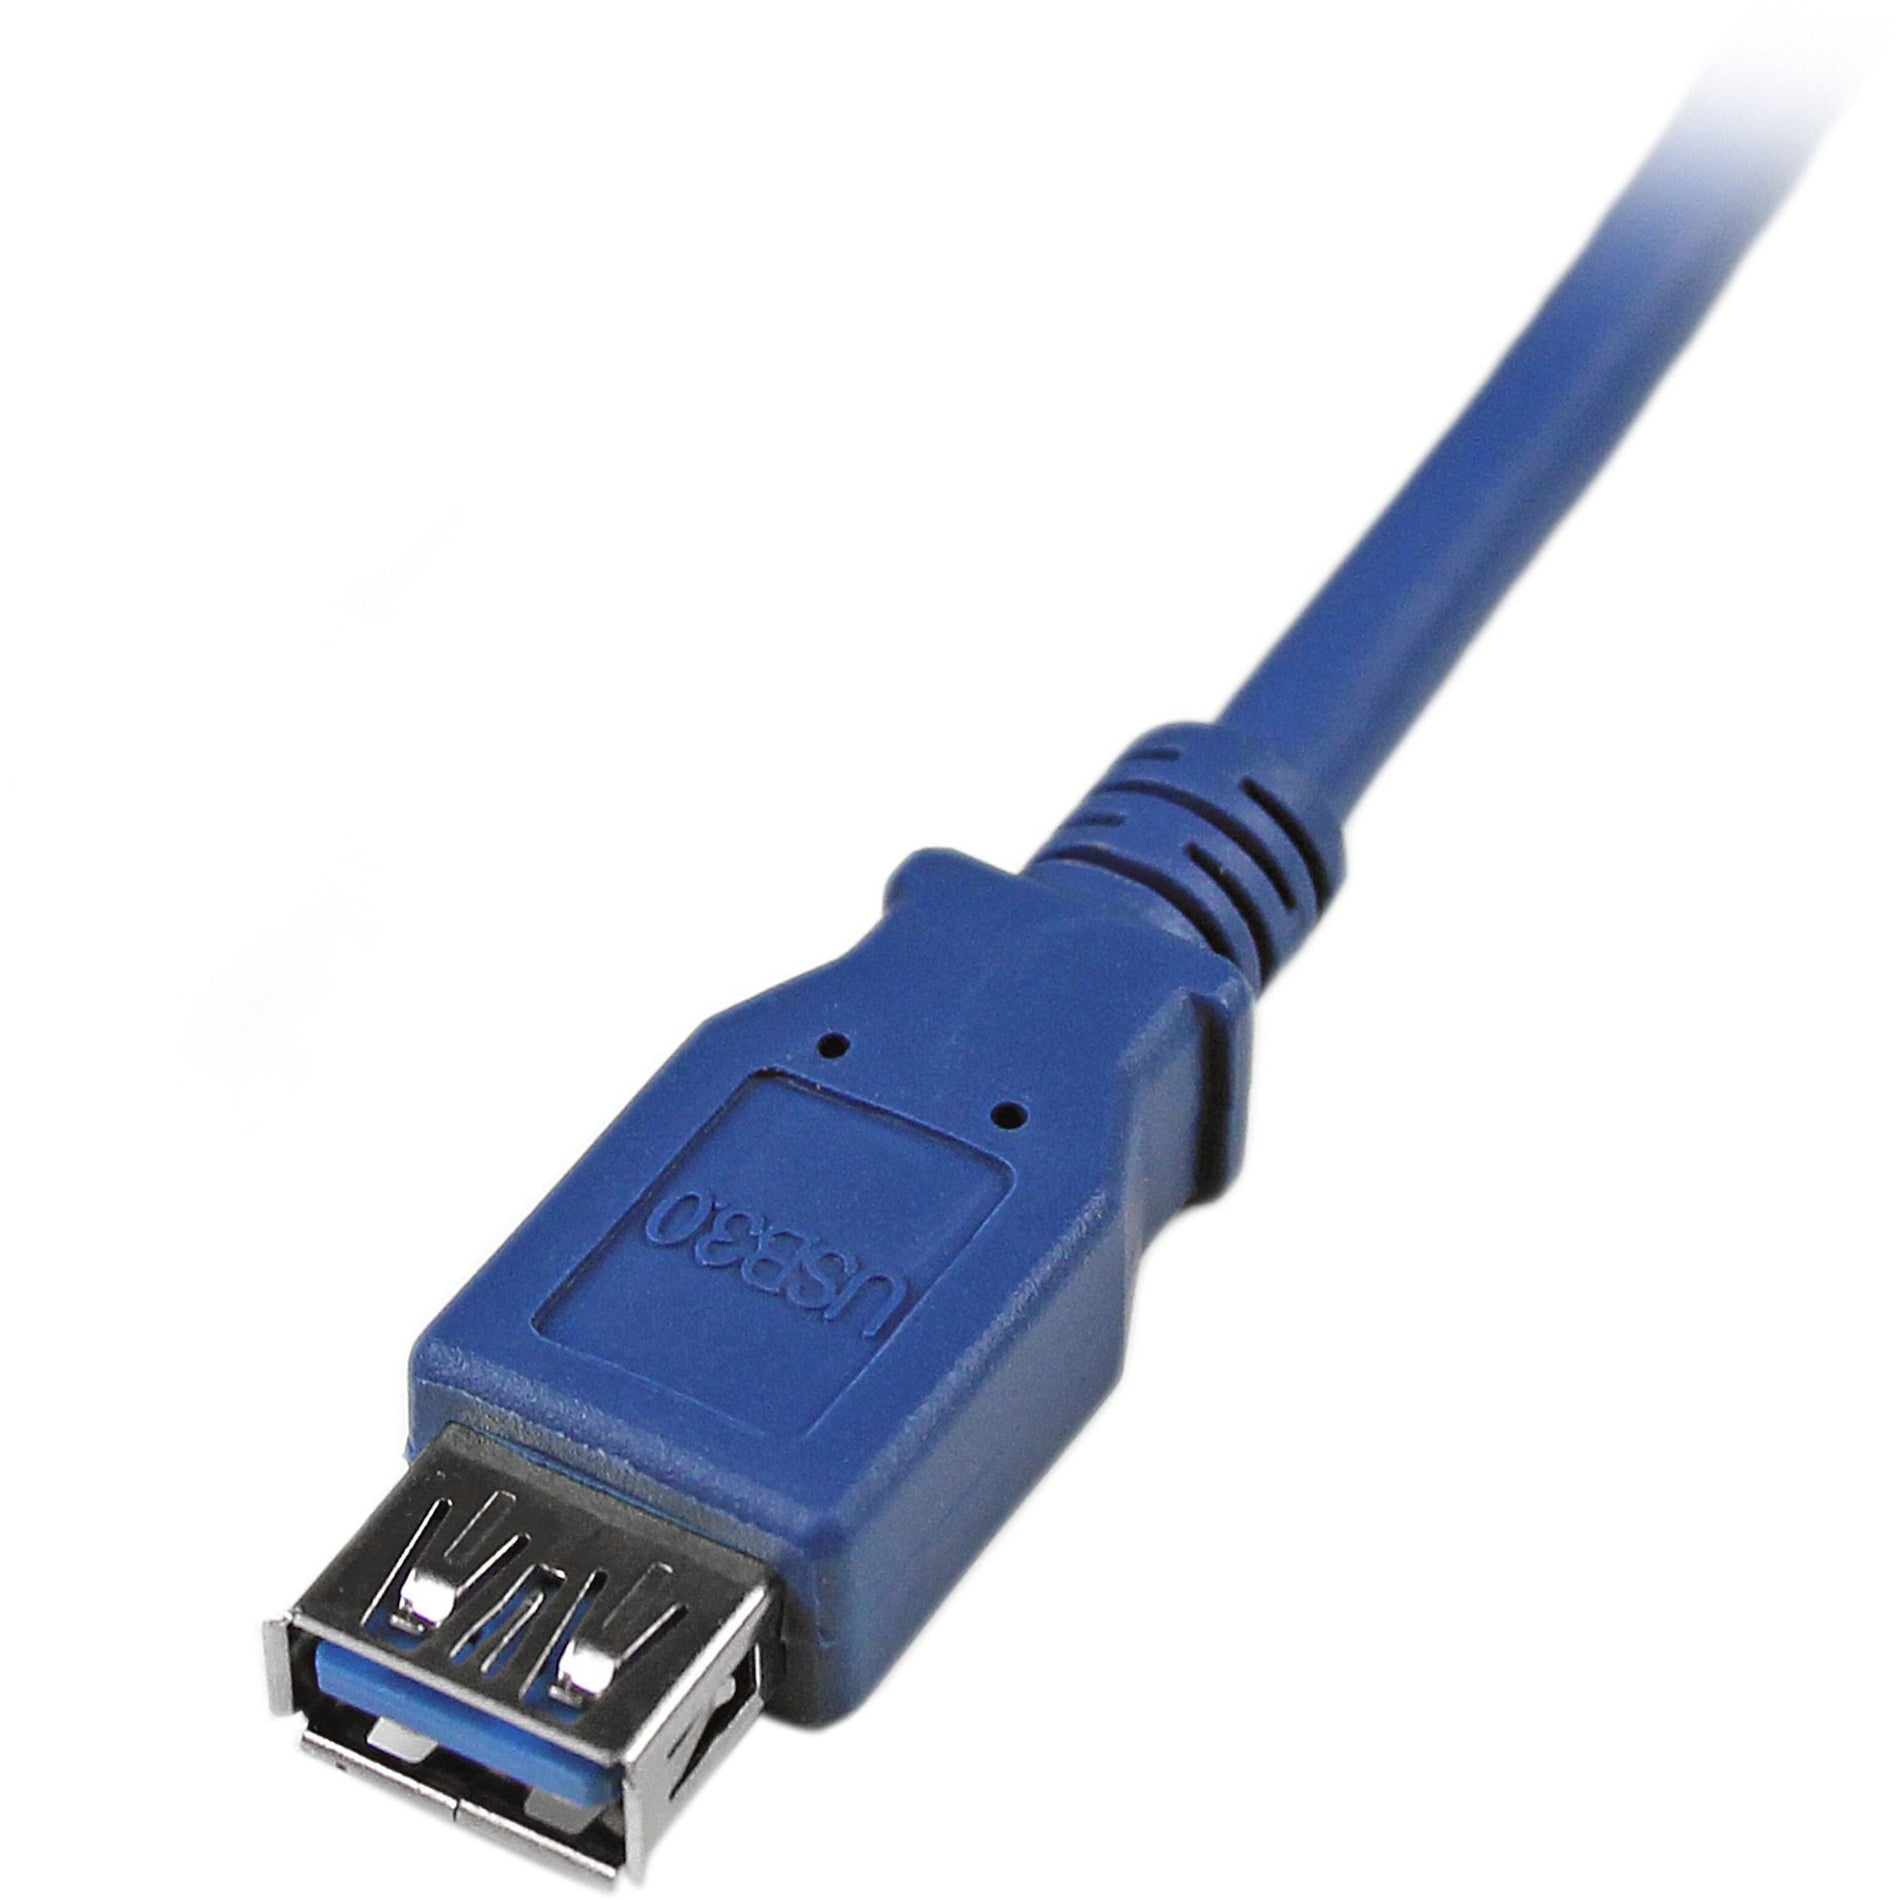 StarTech.com USB3SEXTAA6 6 ft SuperSpeed USB 3.0 Extension Cable A to A M/F, EMI Protection, 5 Gbit/s Data Transfer Rate, Blue